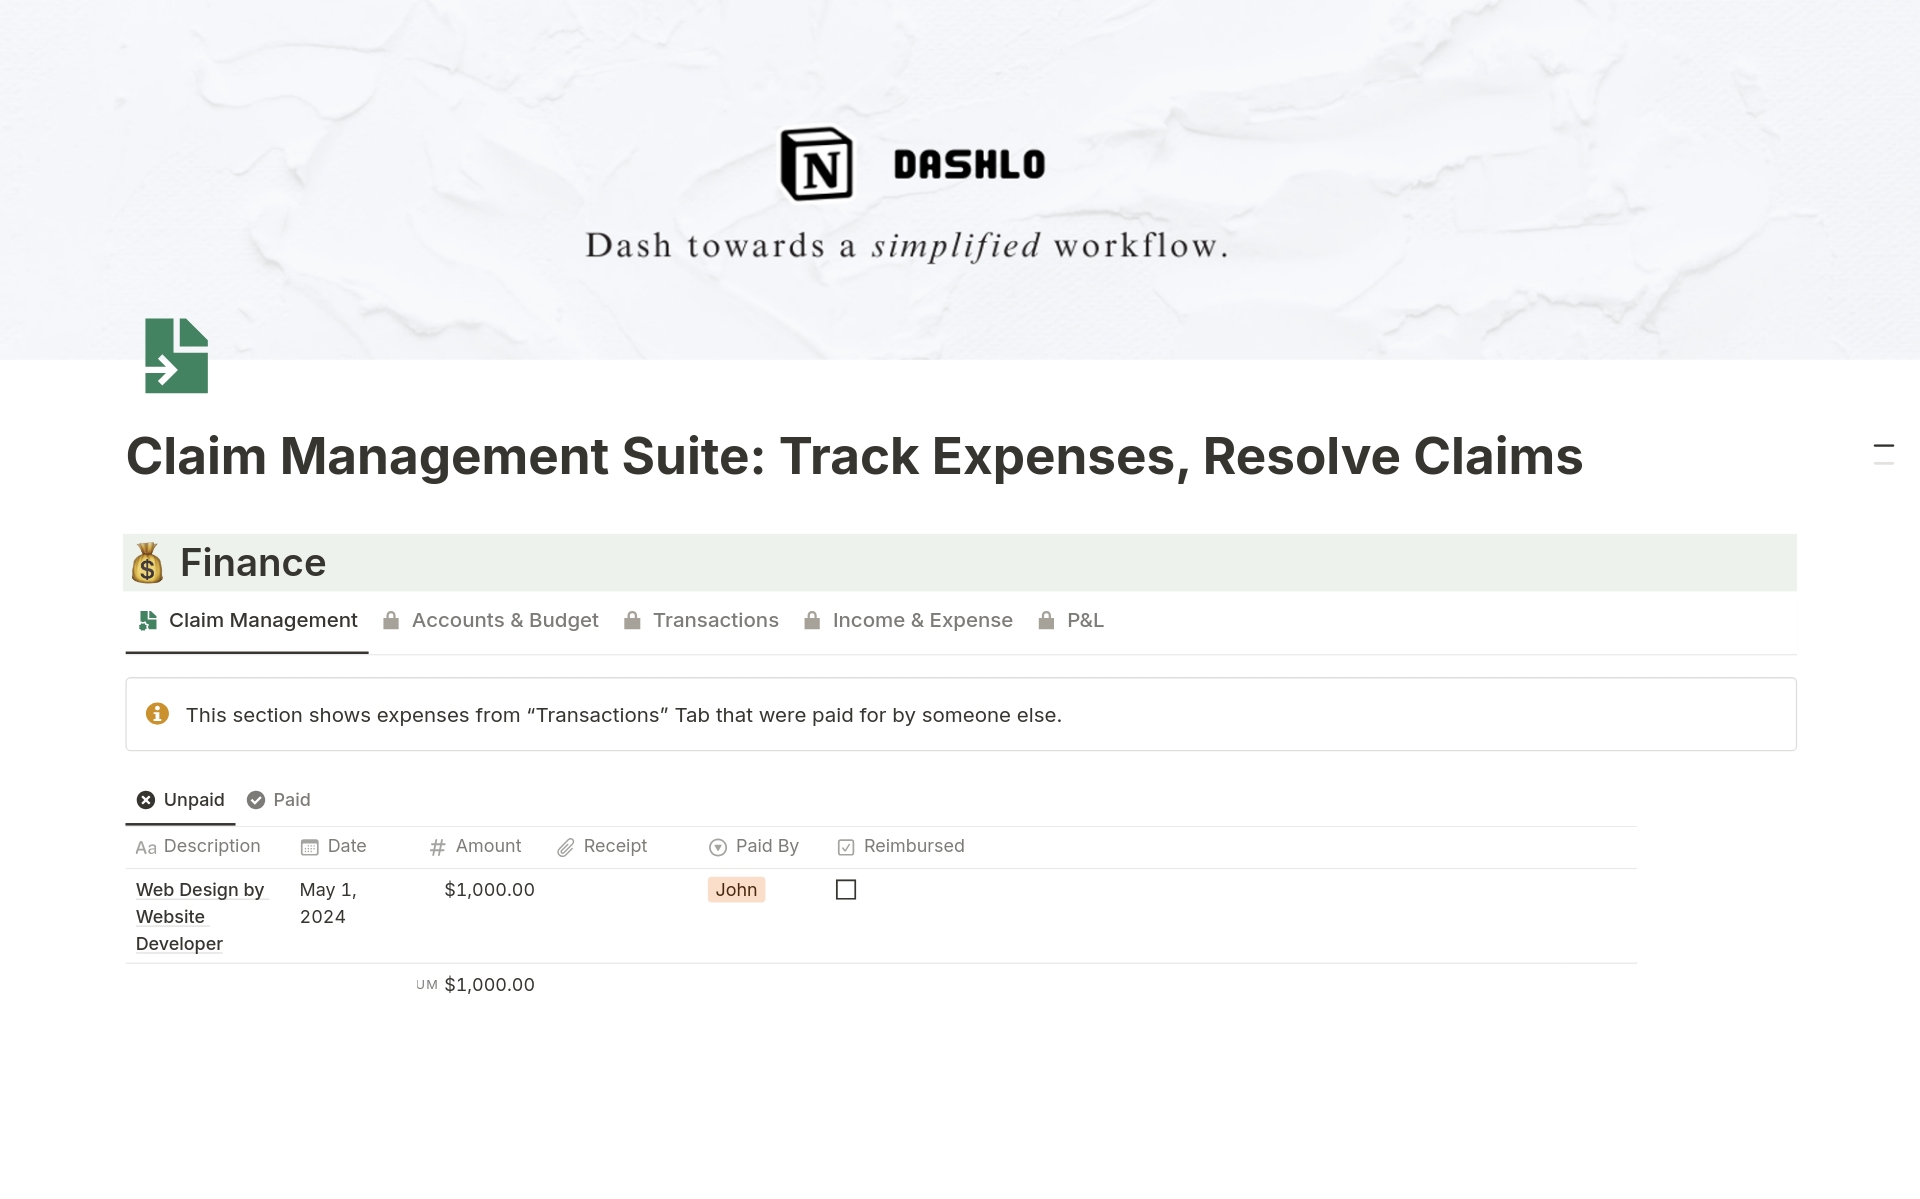 Empowers you to track expenses, monitor claim status, and ensure timely reimbursements:
✓ 𝗠𝗮𝗻𝗮𝗴𝗲 𝗨𝗻𝗽𝗮𝗶𝗱 𝗖𝗹𝗮𝗶𝗺𝘀: Prioritize outstanding claims
✓ 𝗧𝗿𝗮𝗰𝗸 𝗣𝗮𝗶𝗱 𝗖𝗹𝗮𝗶𝗺𝘀: Review settlements
✓ 𝗖𝗮𝗽𝘁𝘂𝗿𝗲 Detailed Claim Information